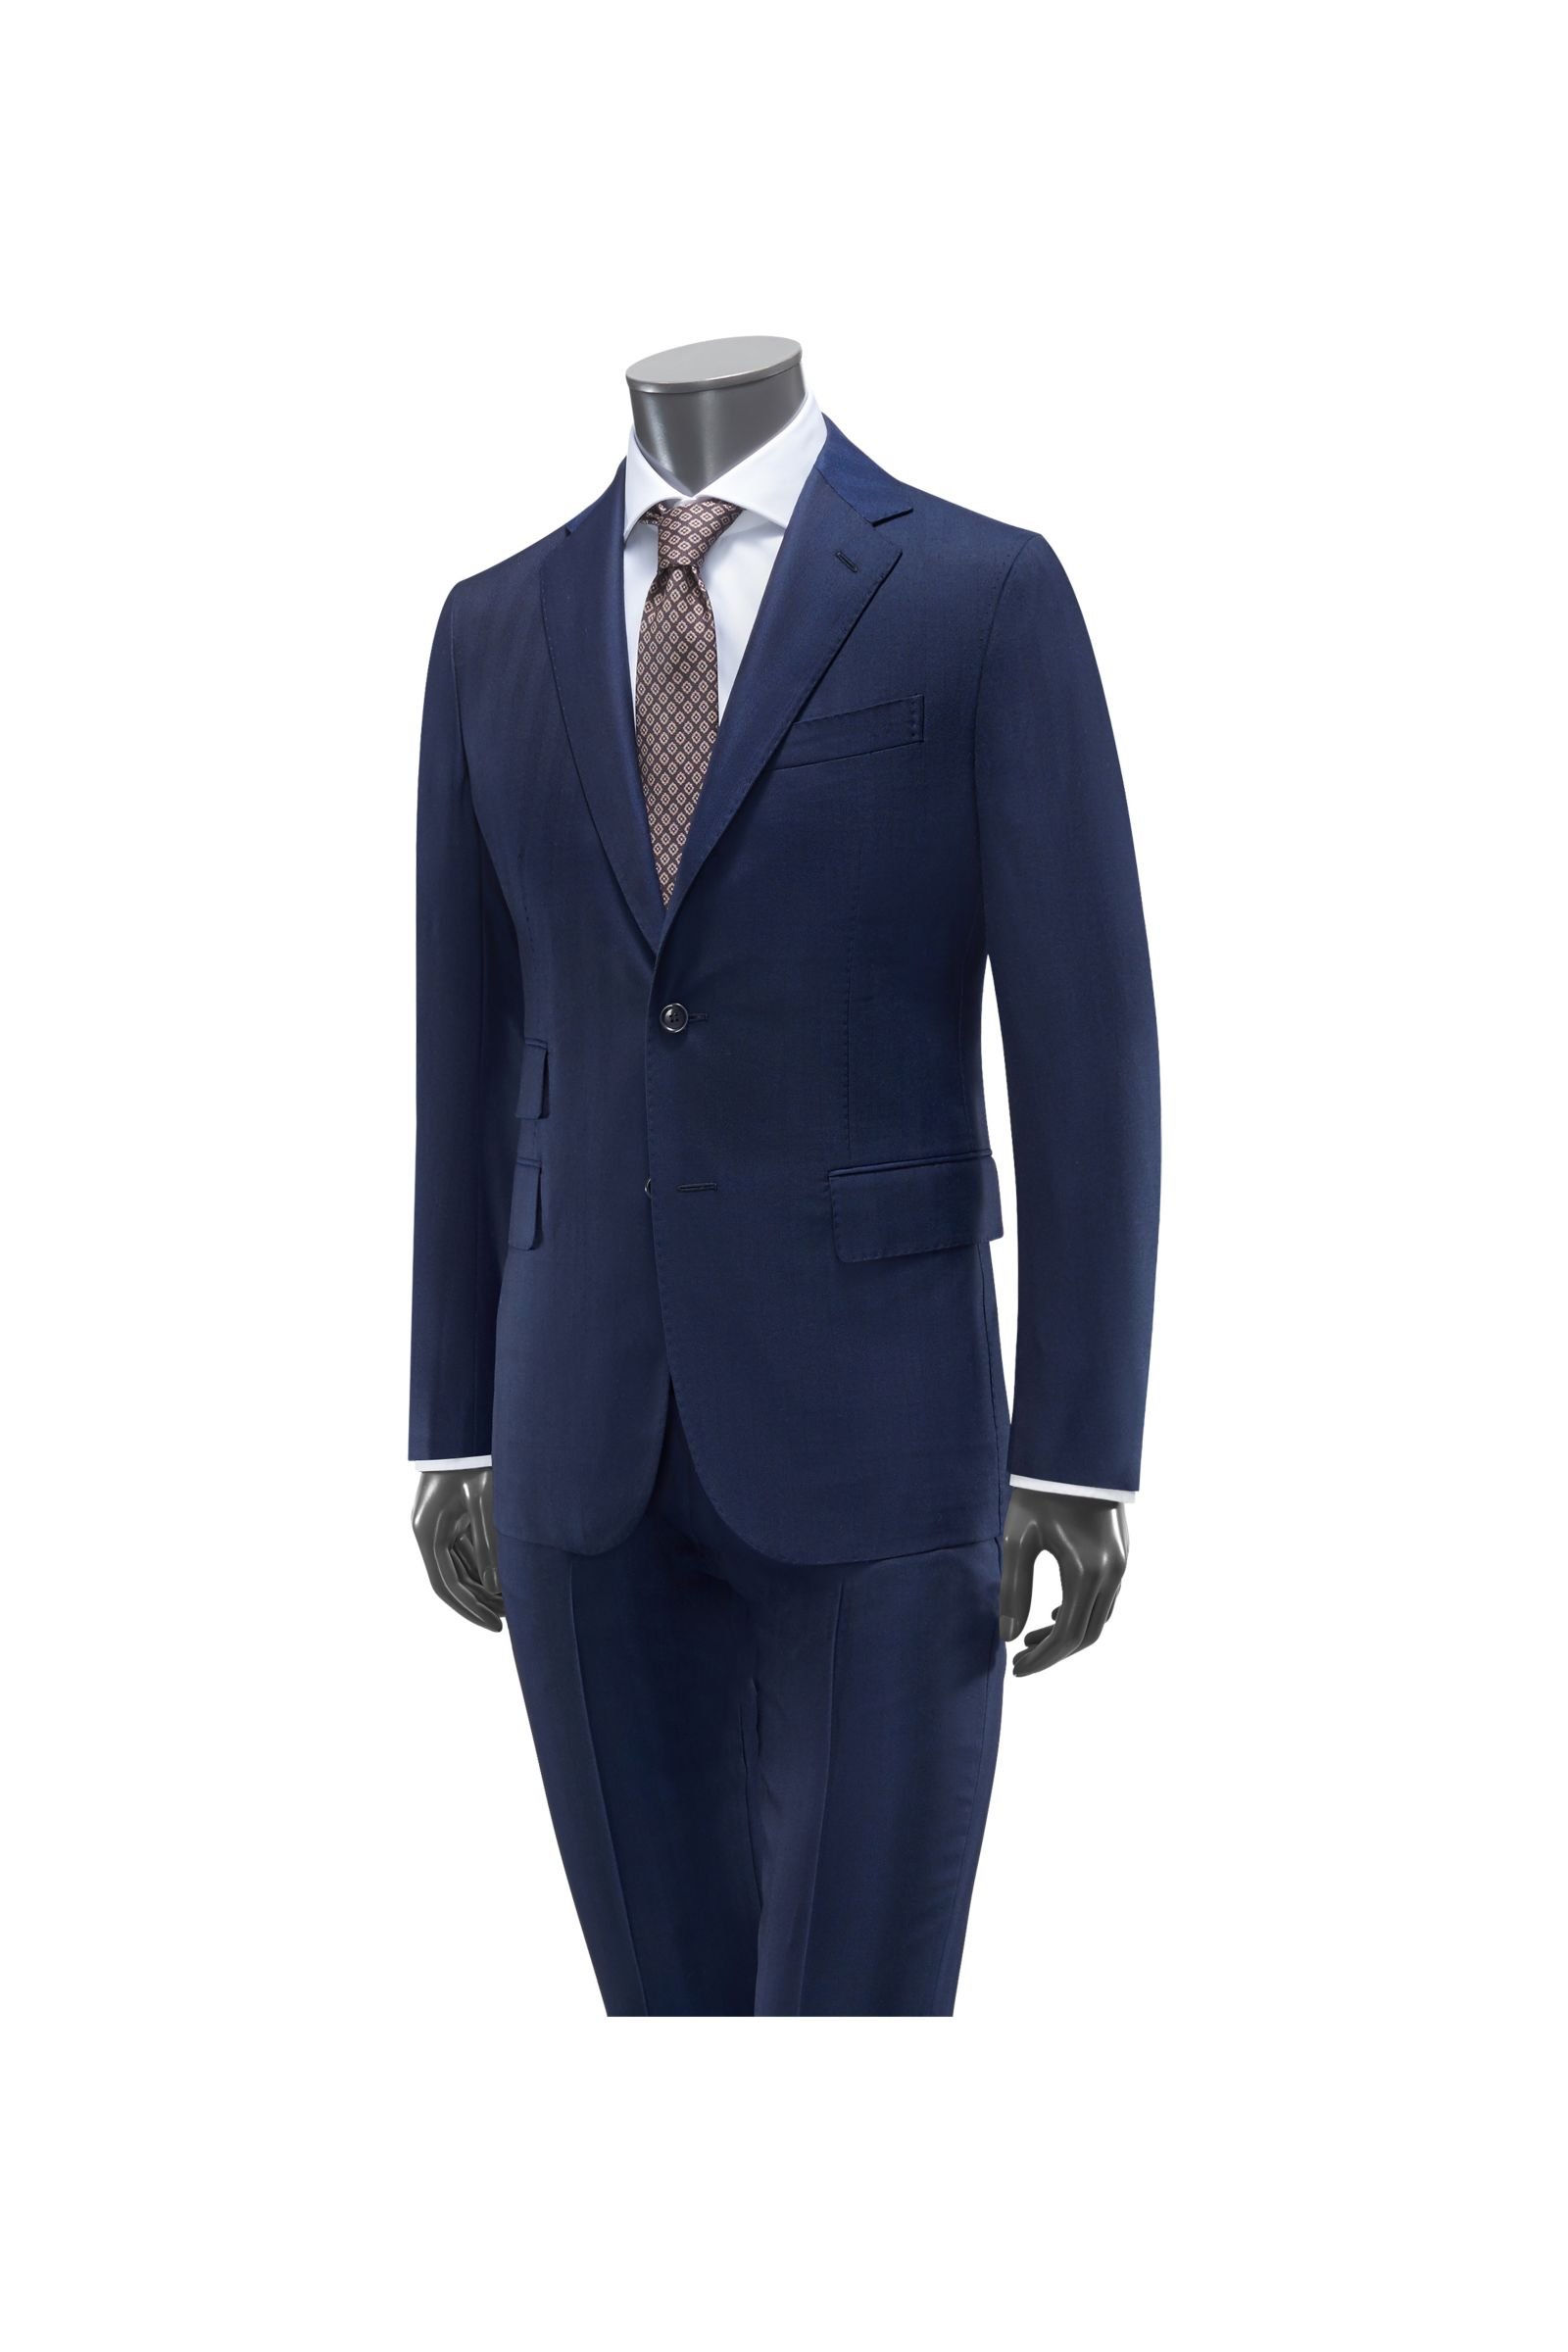 Suit navy patterned